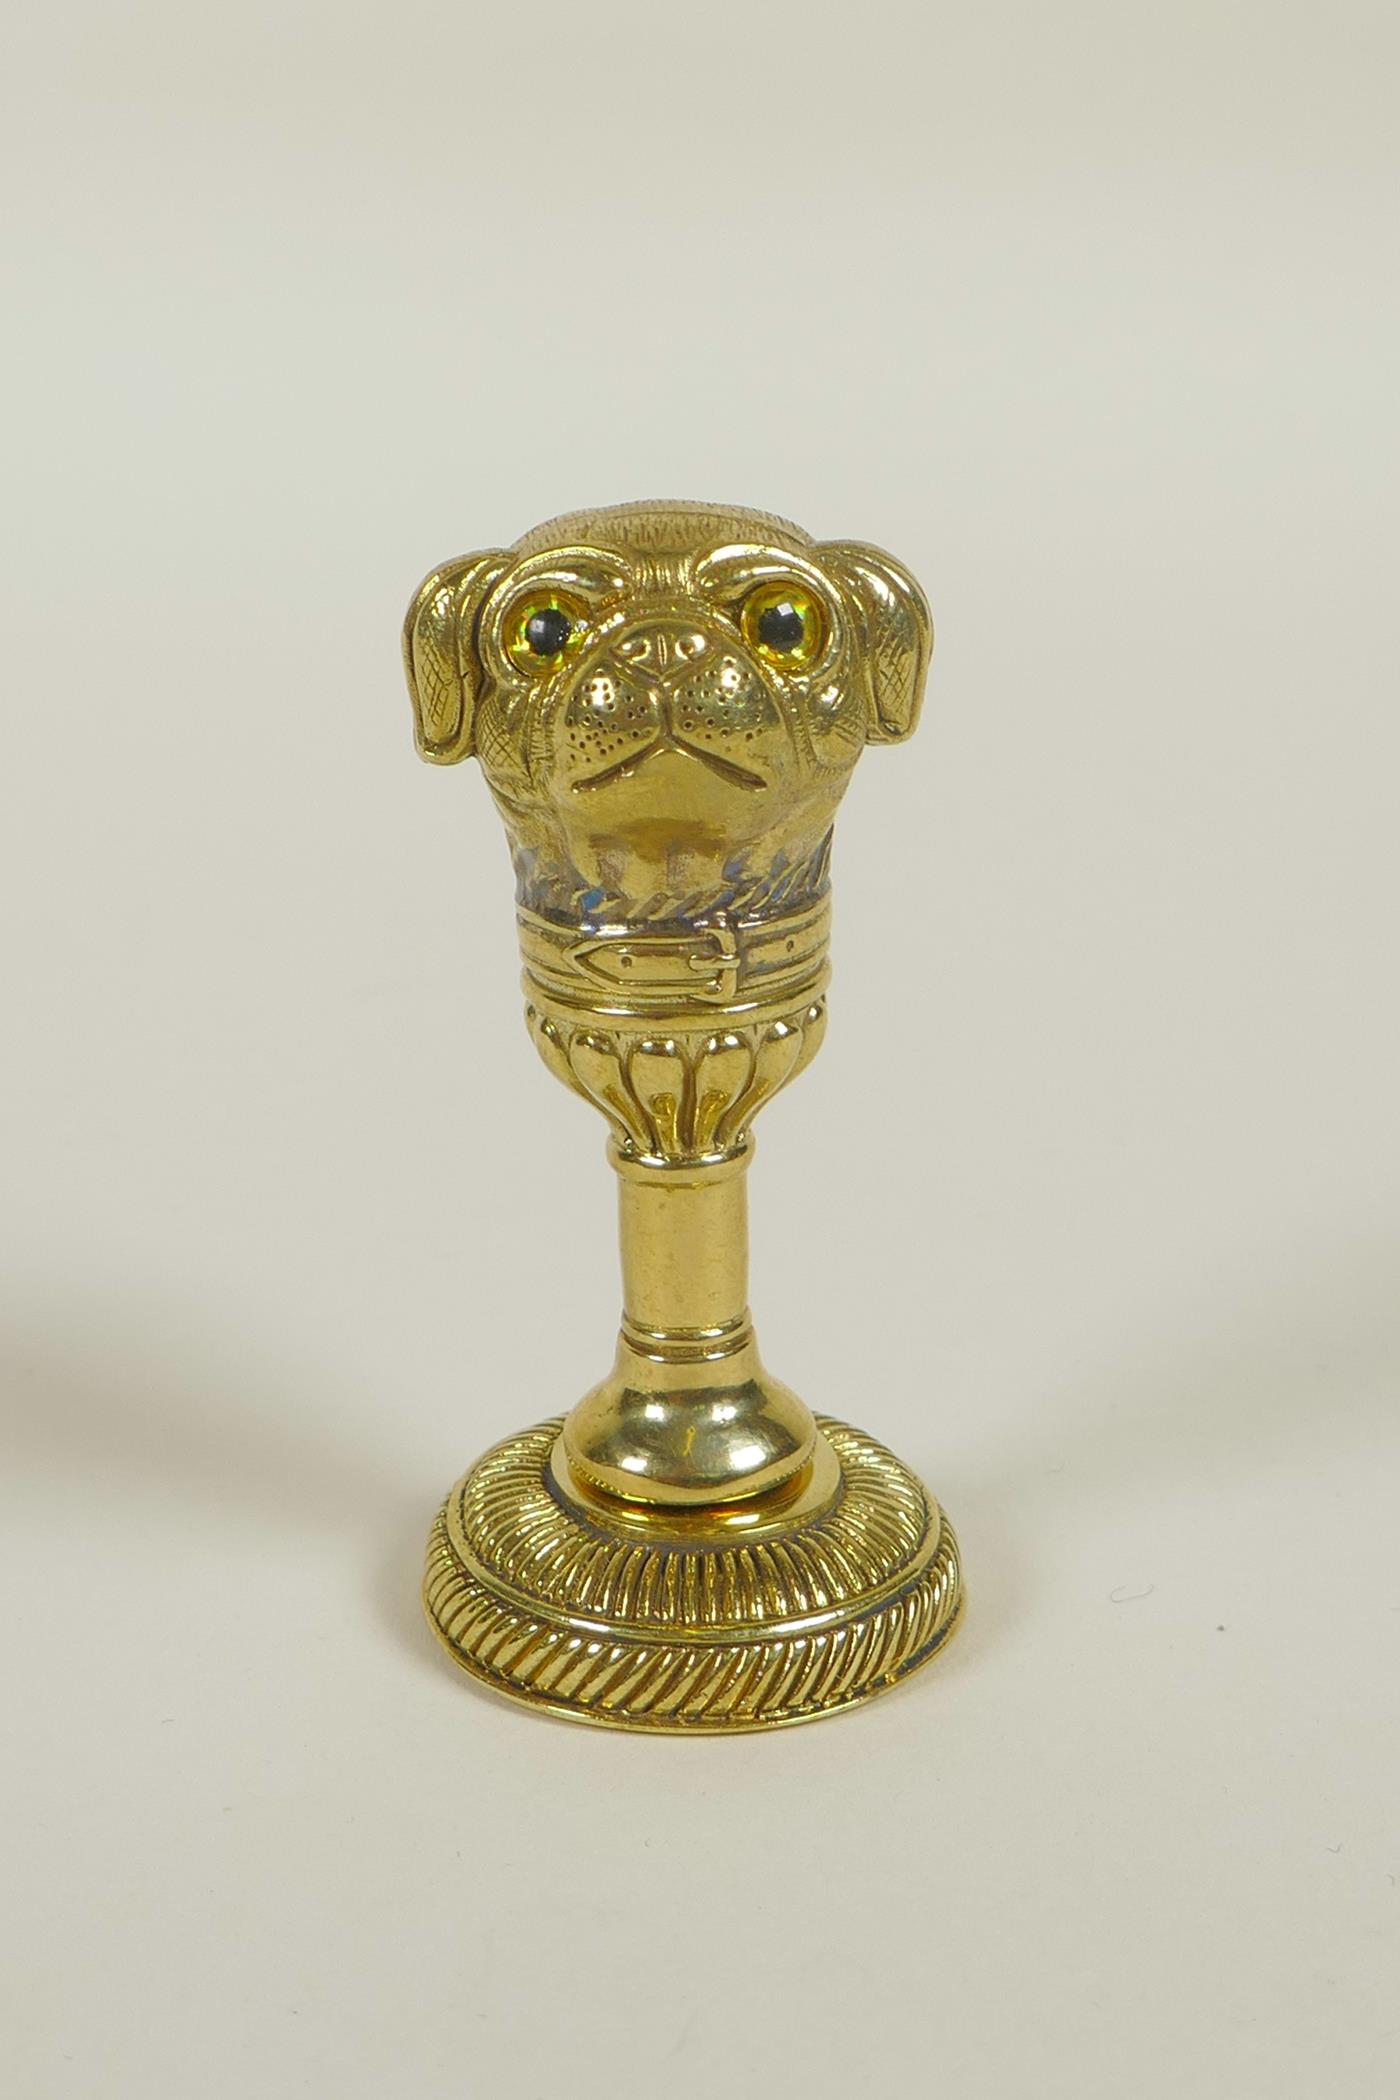 A brass document seal with a handle in the form of a dog, 2" high